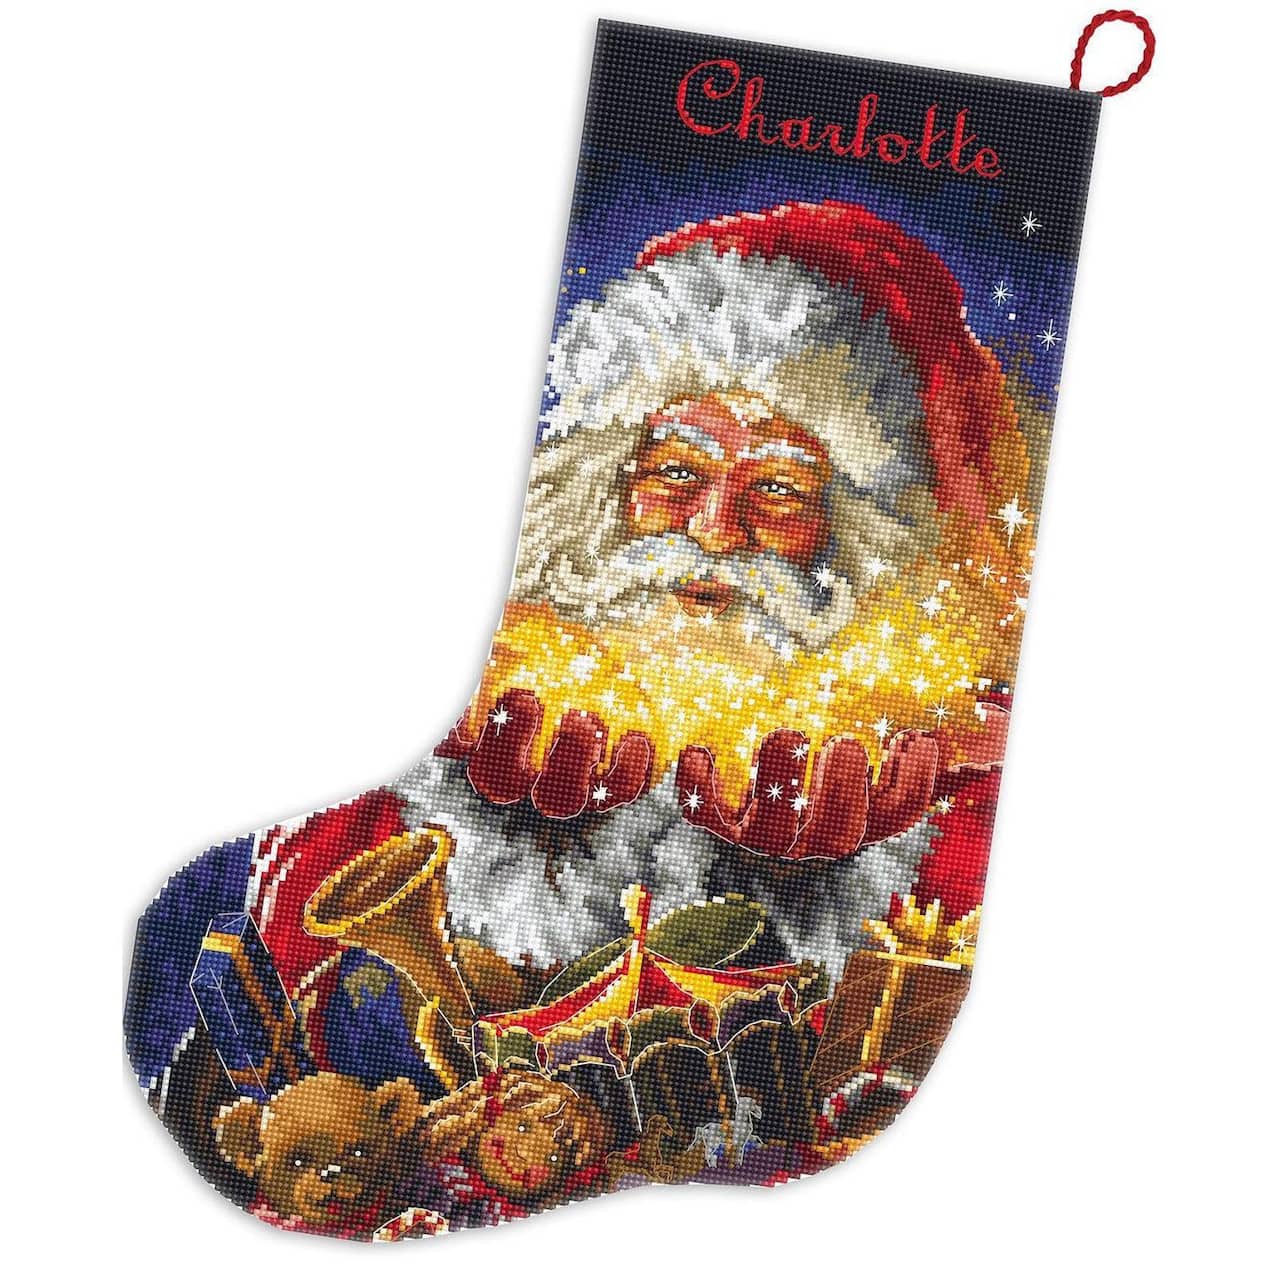 Letistitch Christmas Miracle Stocking Counted Cross Stitch Kit